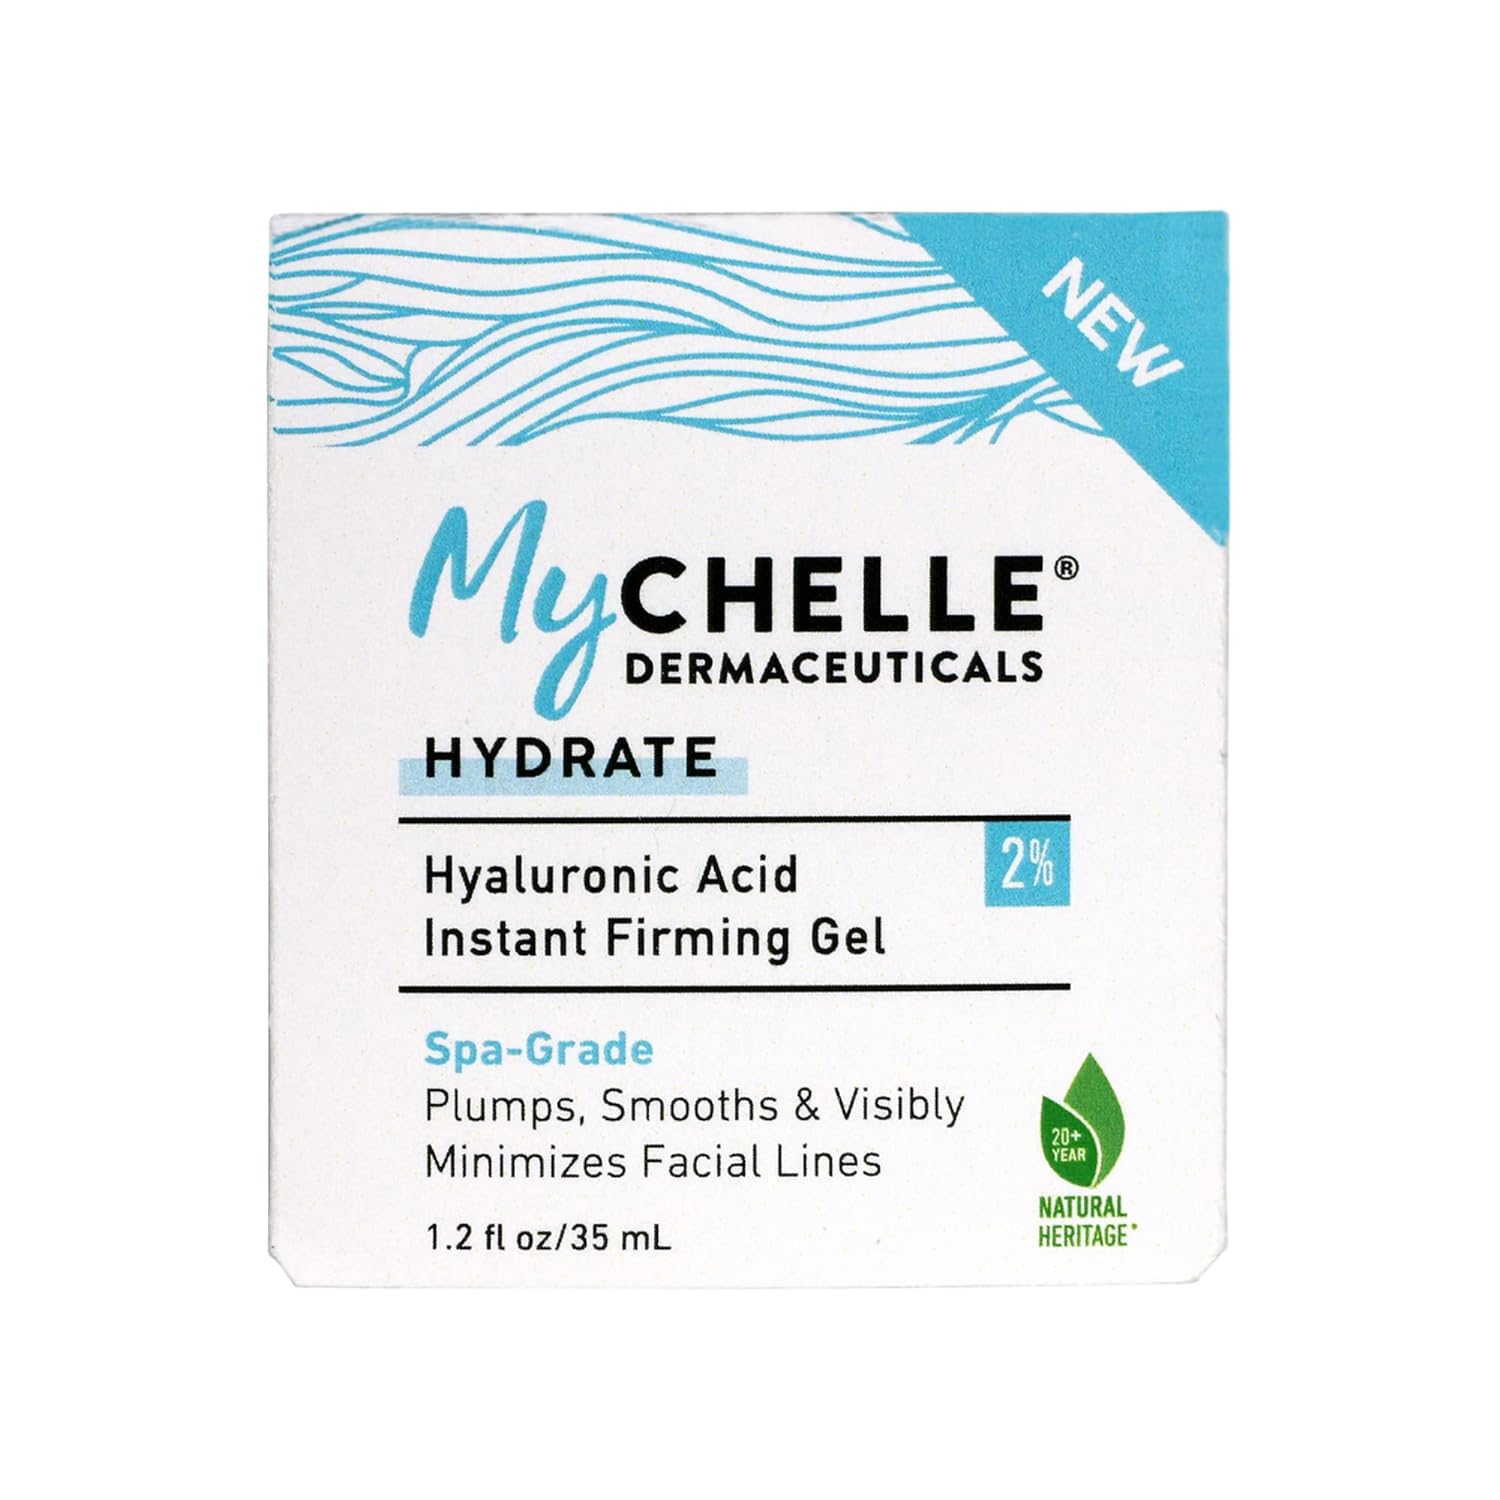 MyChelle Dermaceuticals Instant Firming Gel, Concentrated 2% Spa Grade Hyaluronic Acid